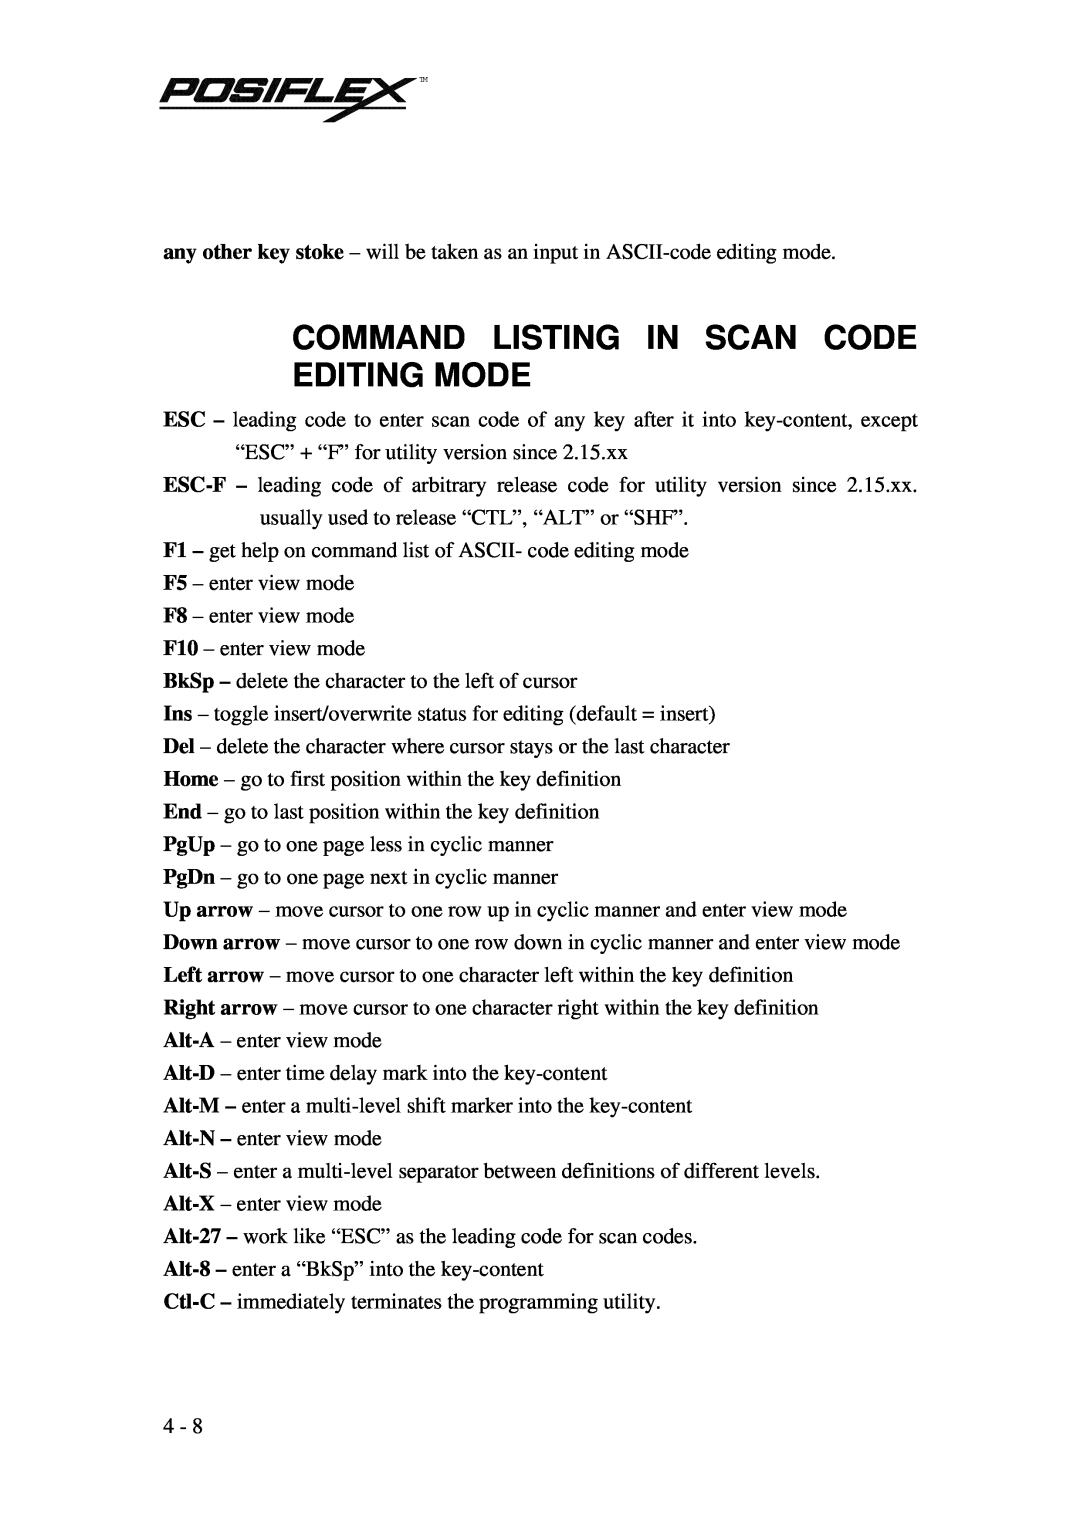 POSIFLEX Business Machines PST KB136 manual Command Listing In Scan Code Editing Mode 